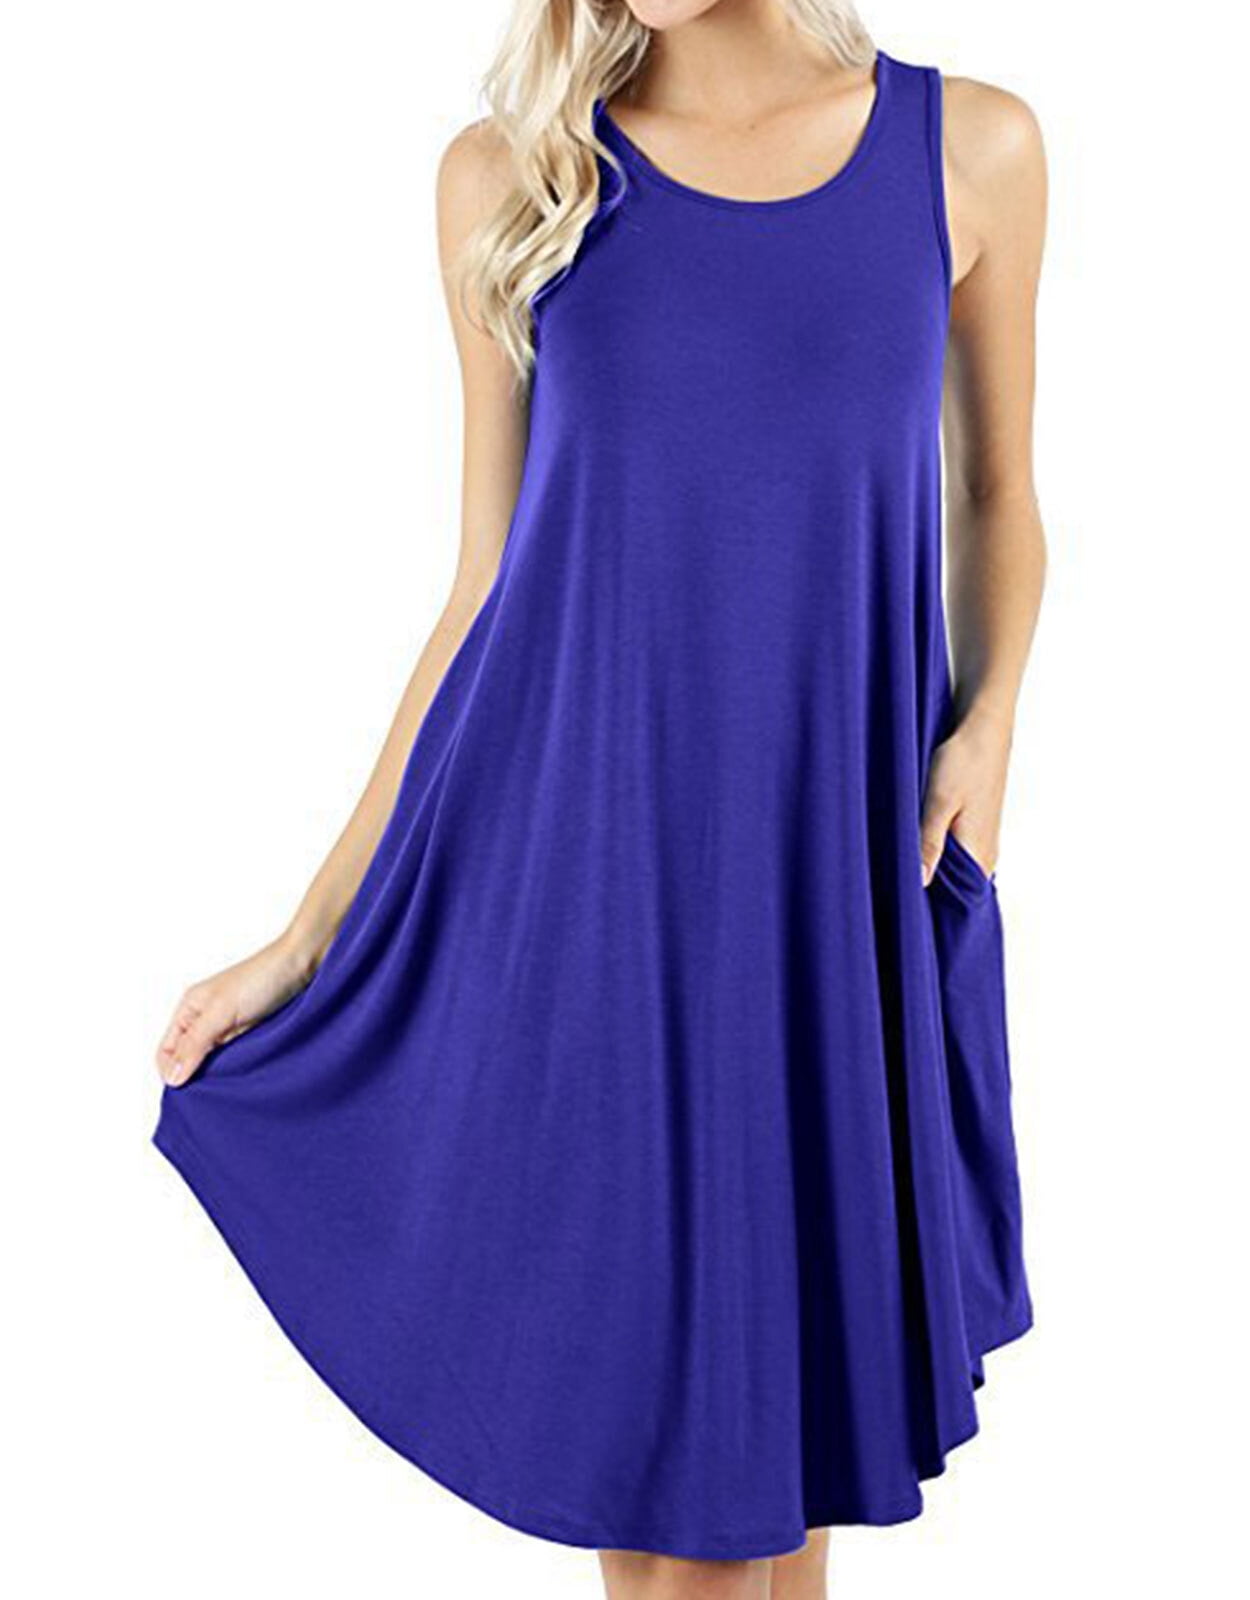 Swimsuit Cover Up for Women Sleeveless Tank Beach Dresses Casual ...